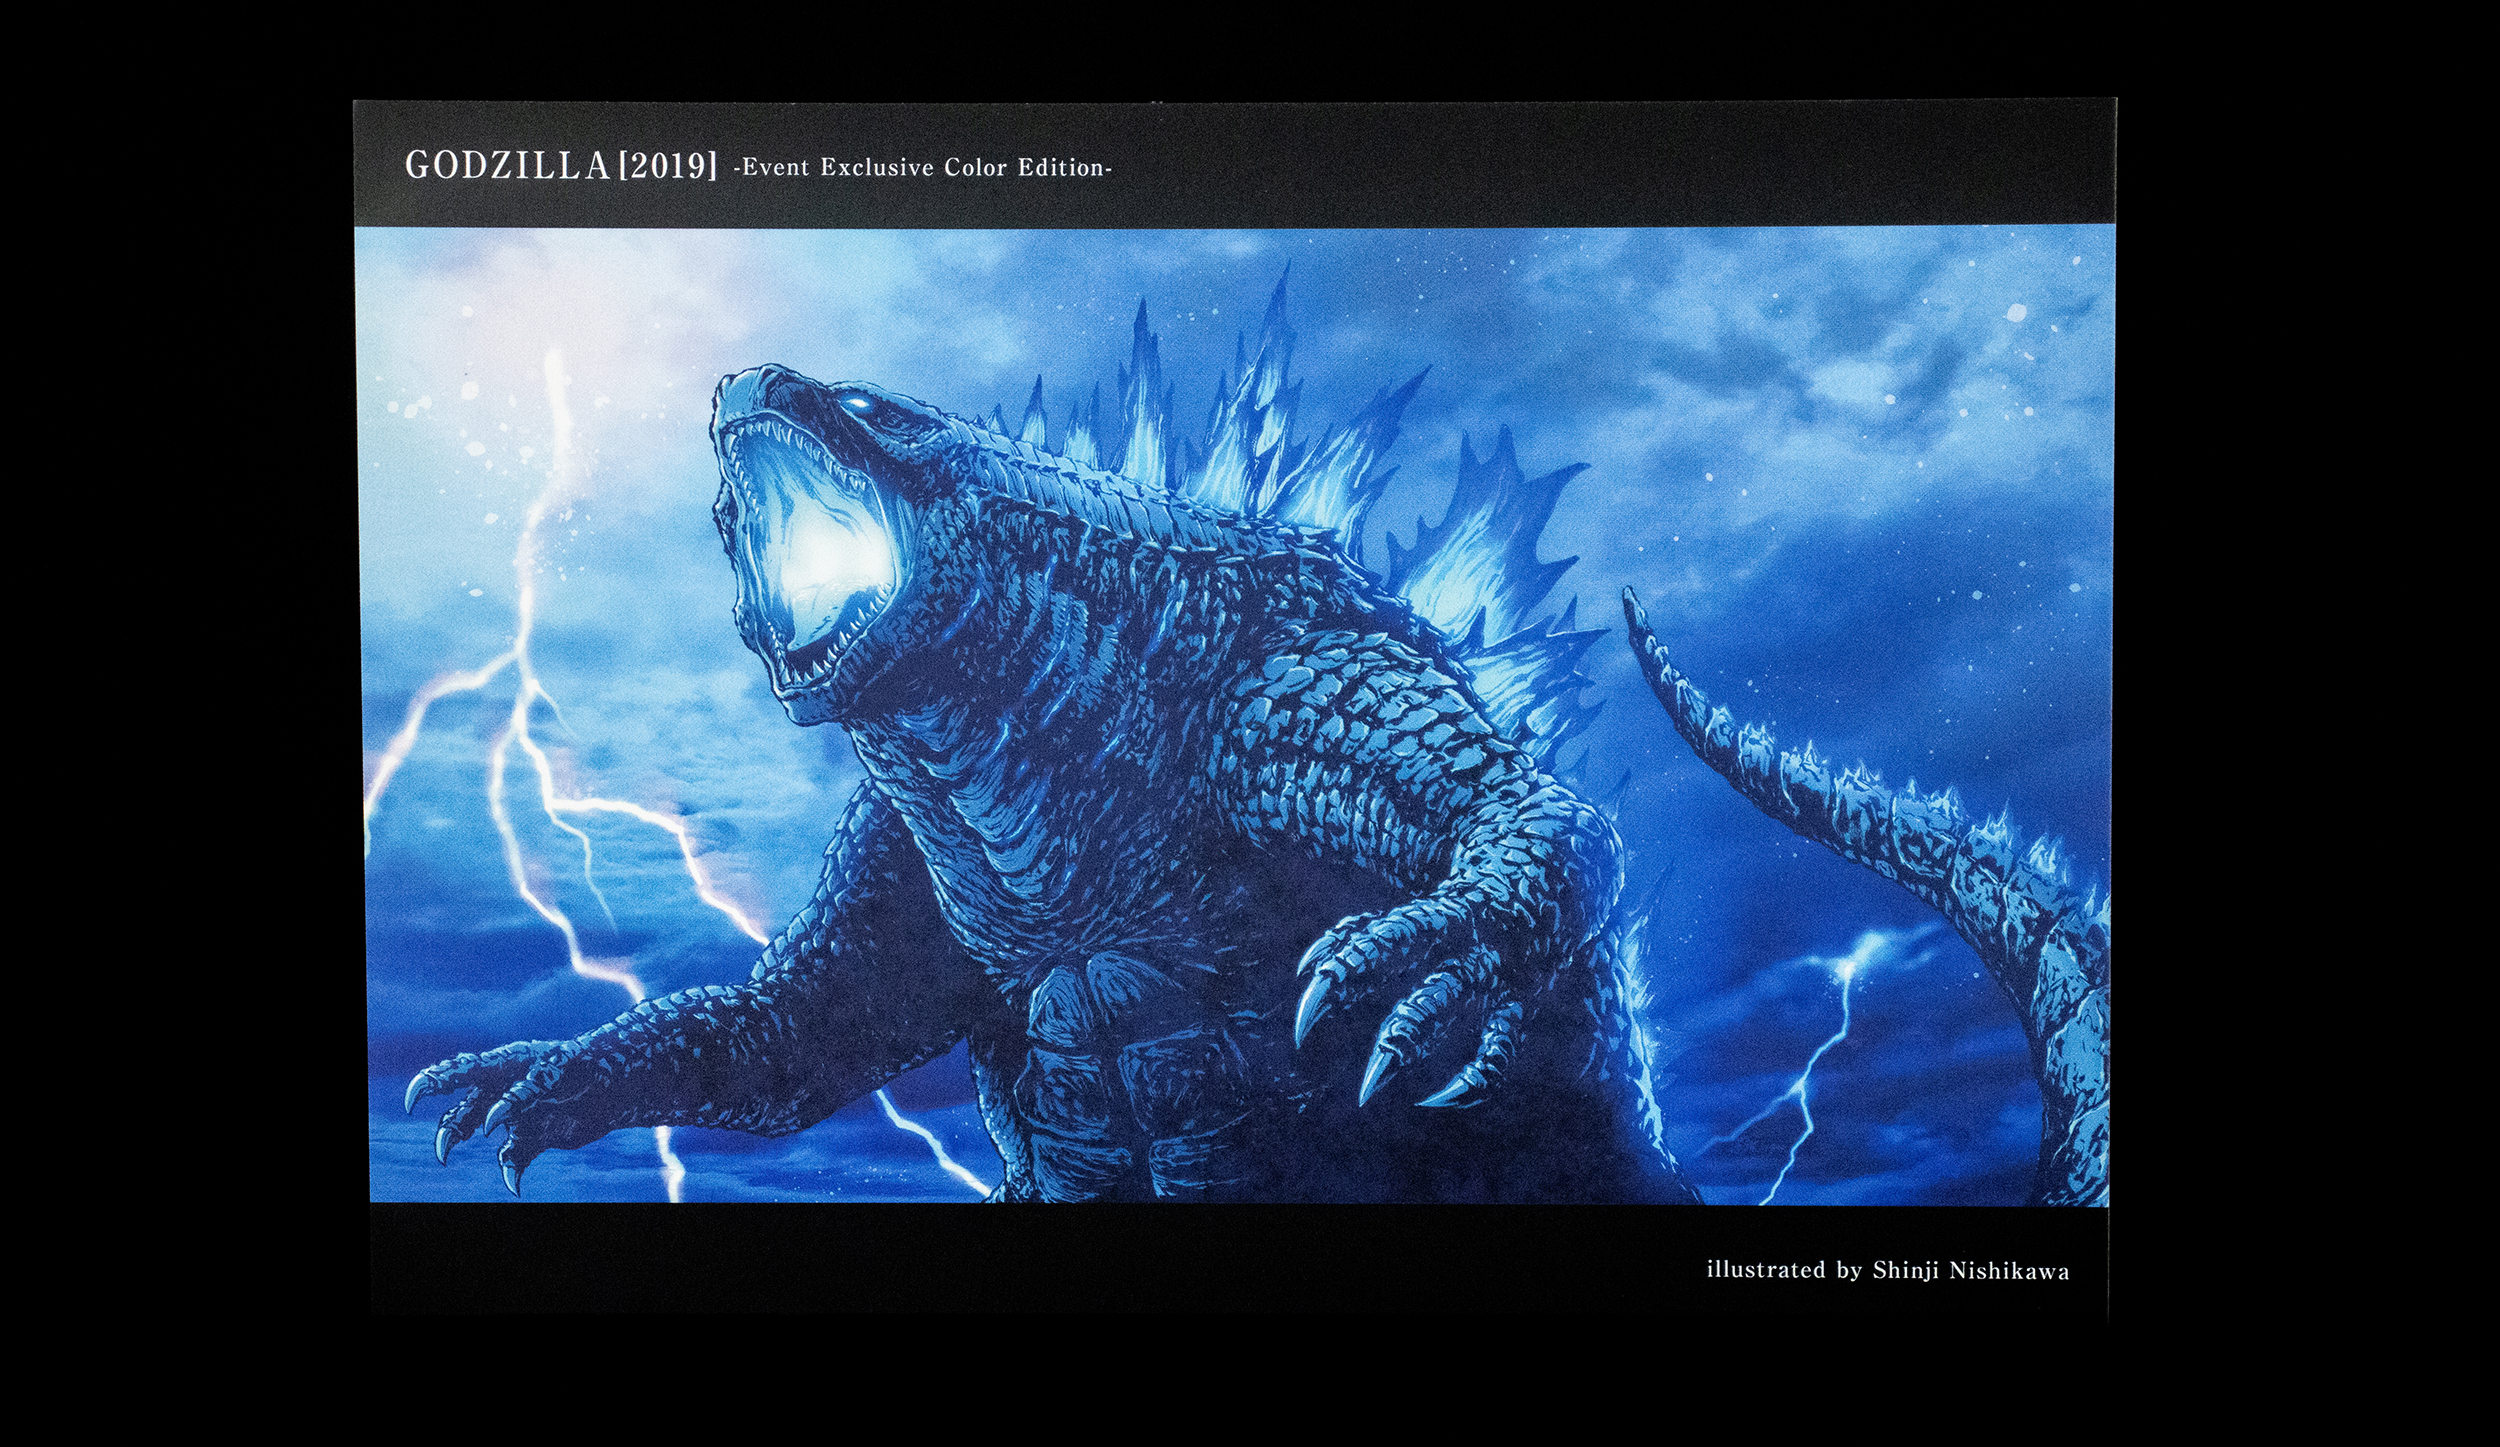 GODZILLA EVENT 2019!] How to get 3 LIMITED EVENT CATALOG ITEMS